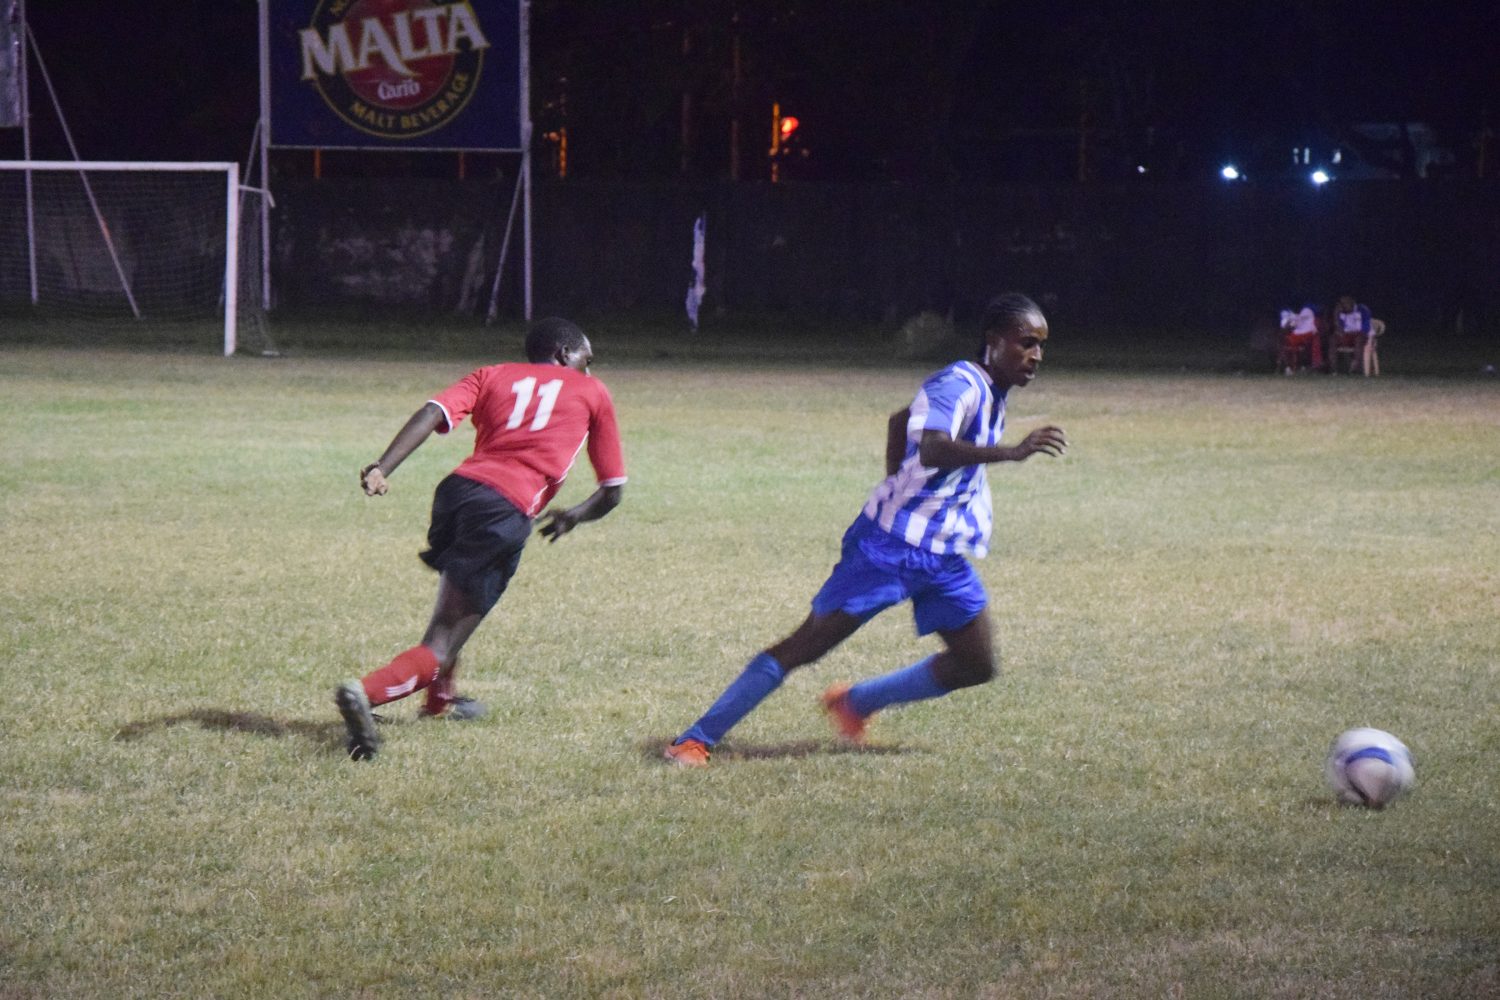 Teon Jones (left) of Riddim Squad in hot pursuit of a GFC during their quarterfinal showdown in the Corona Beer Invitational Football Championship.